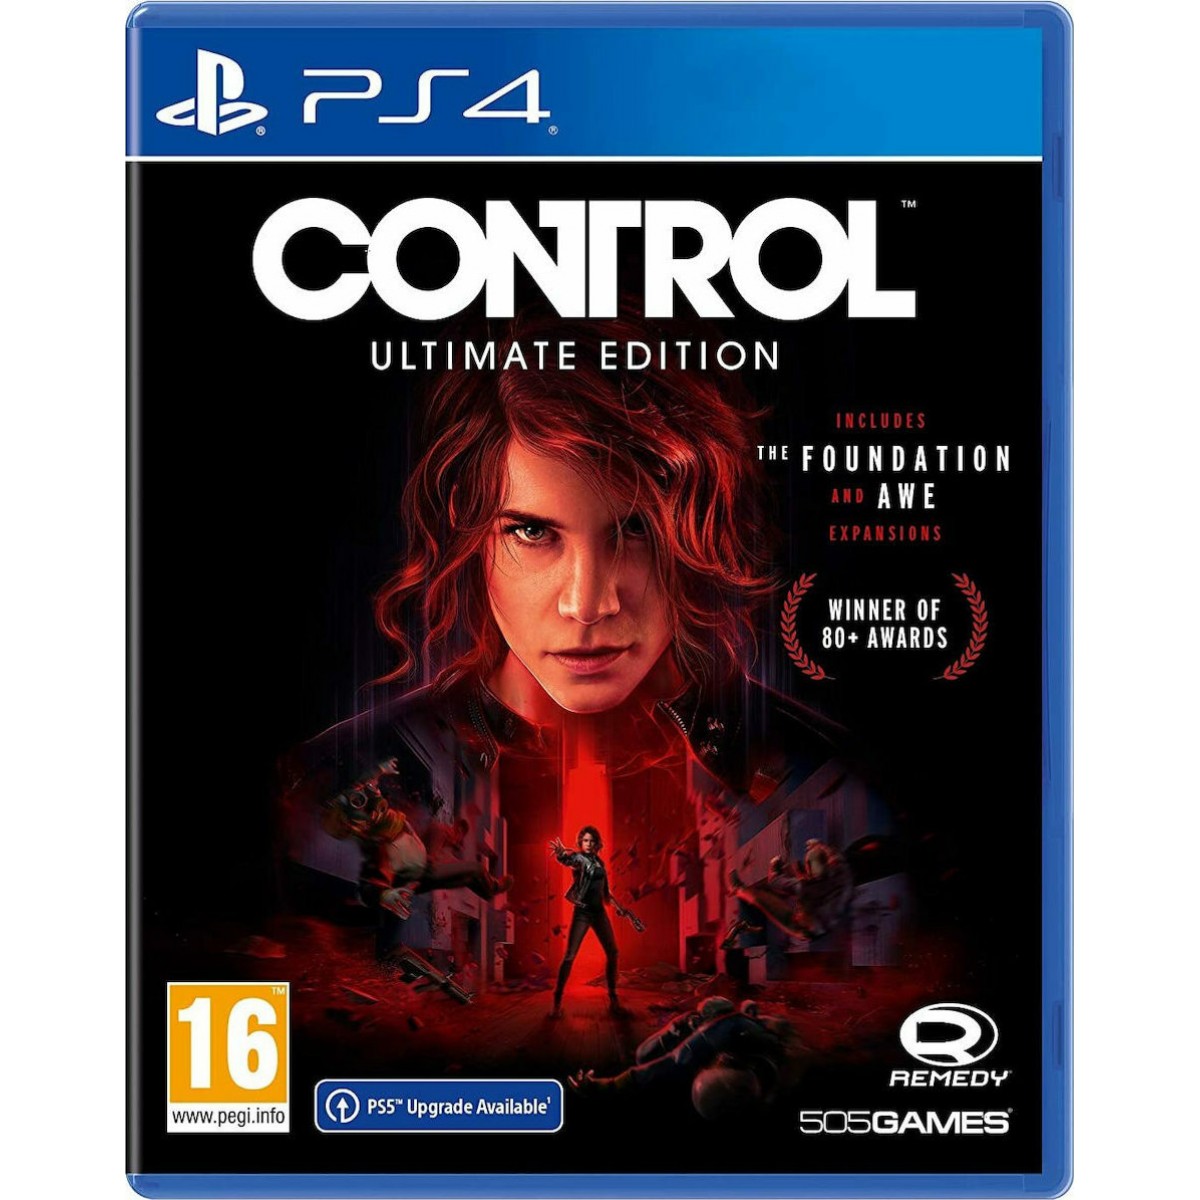 PS4 CONTROL ULTIMATE EDITION GAME